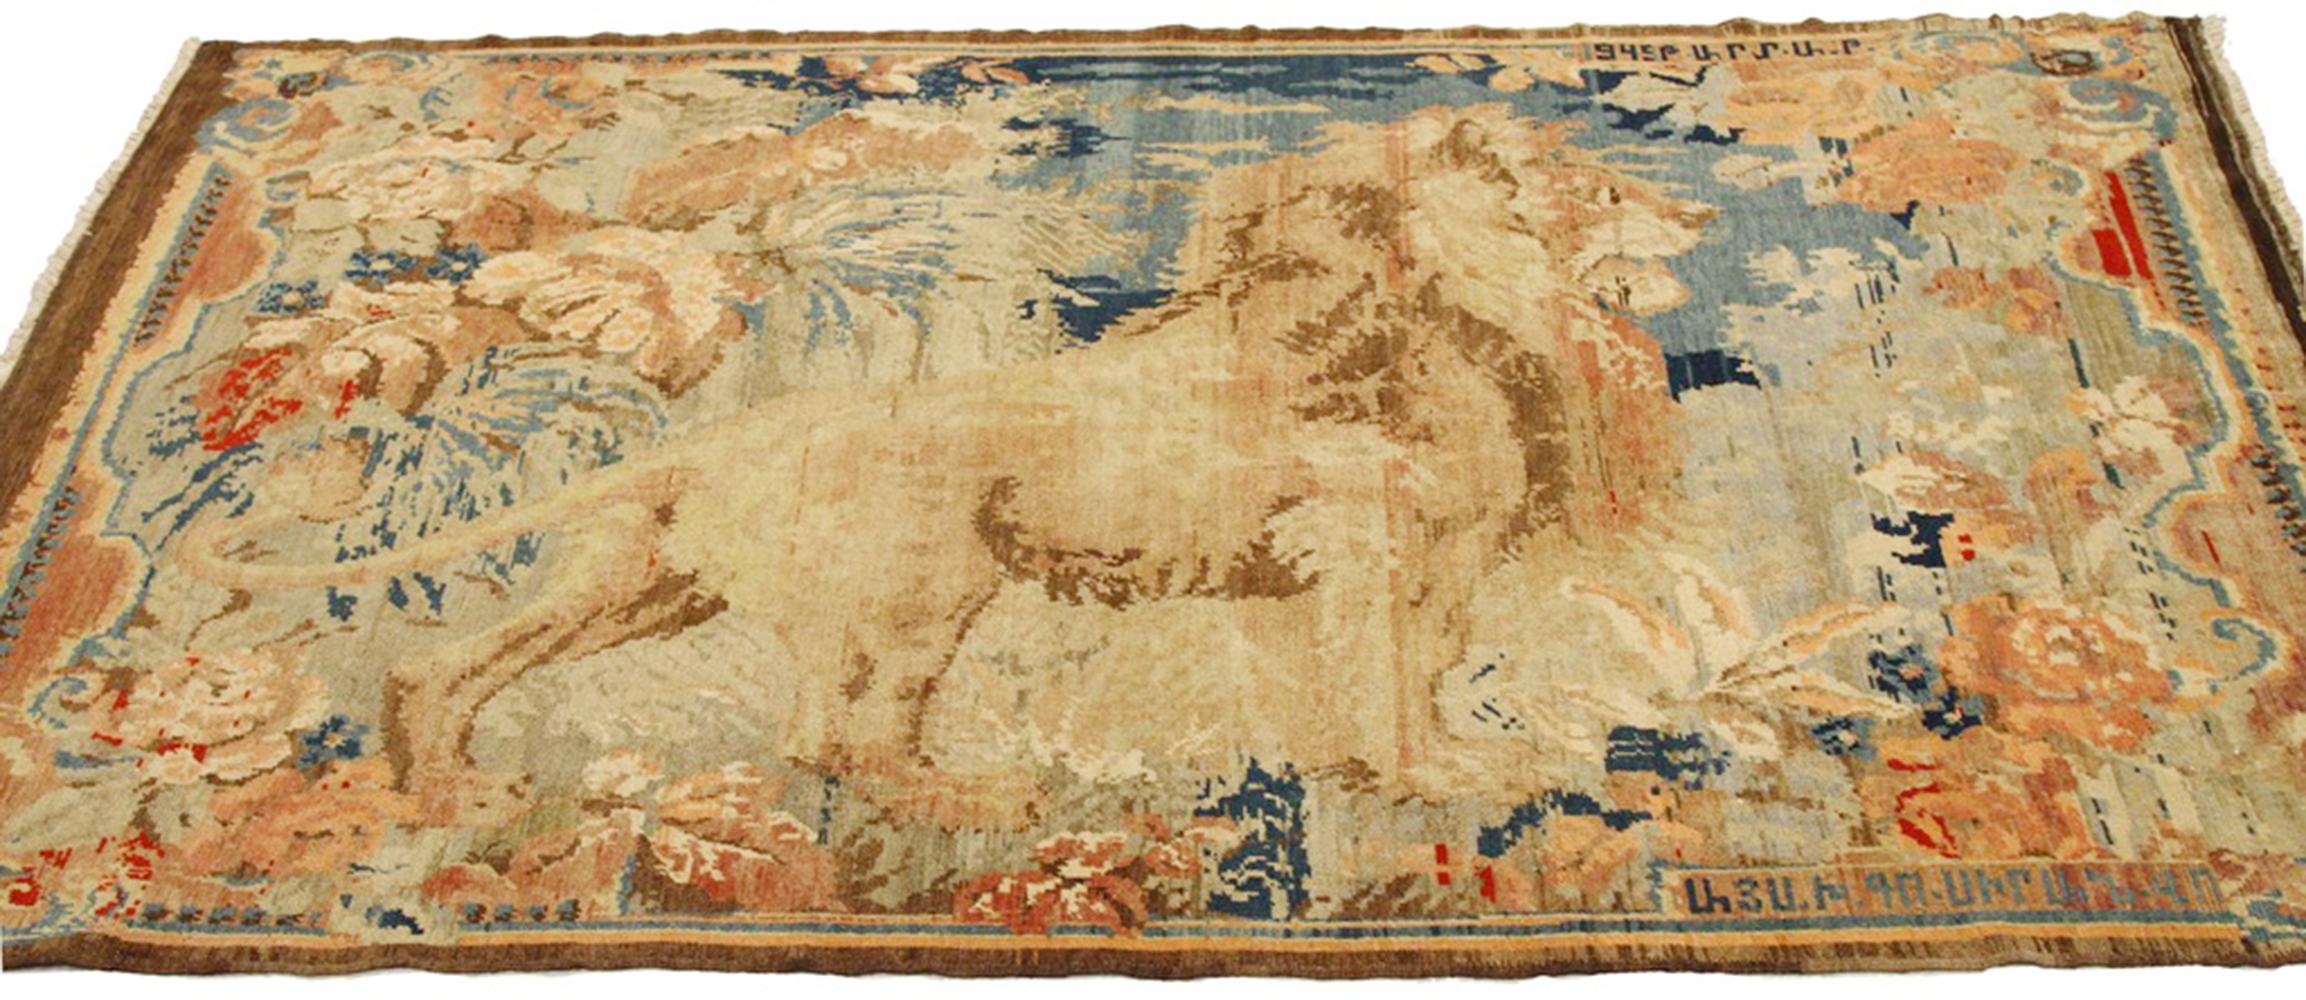 Antique Persian rug handwoven from the finest sheep’s wool and colored with all-natural vegetable dyes that are safe for humans and pets. It’s a traditional Karabagh design featuring a colorful lion figure over blue and pink field. It’s an elegant